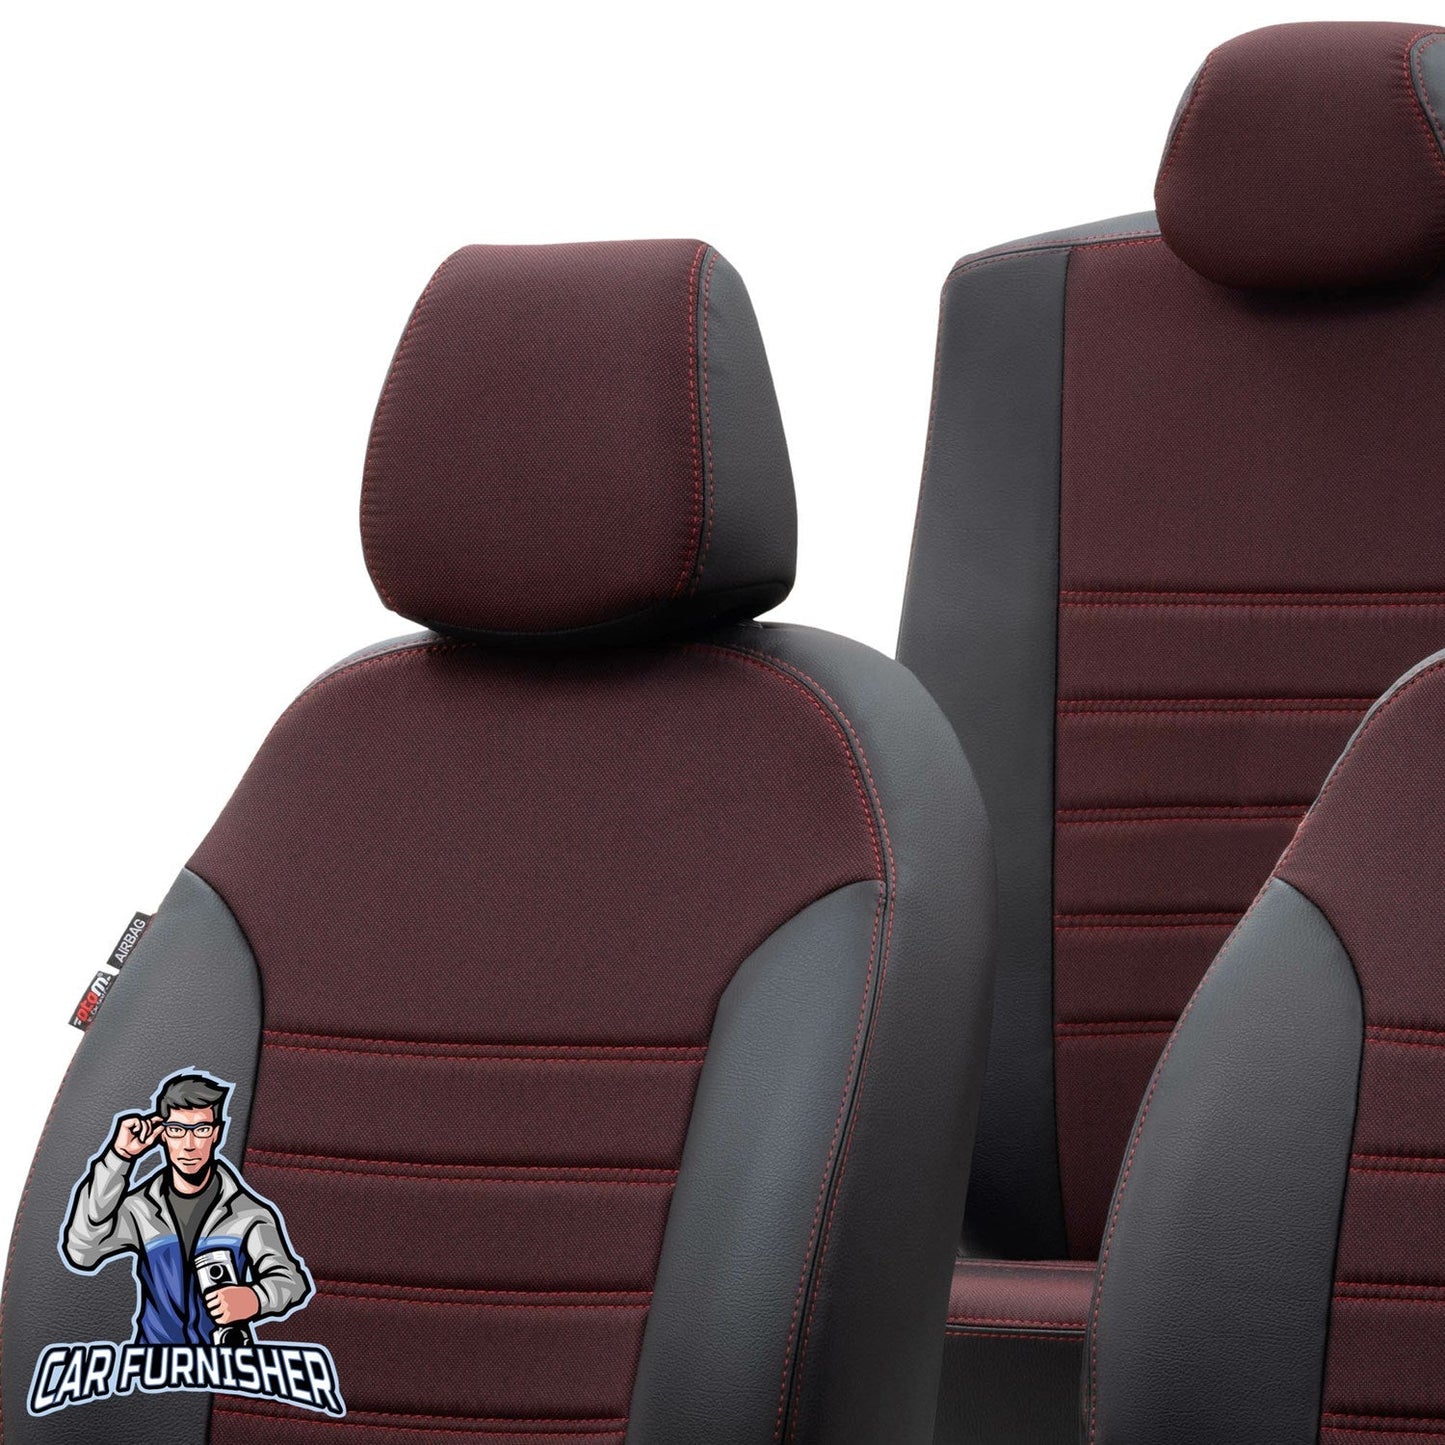 Toyota CHR Seat Cover Paris Leather & Jacquard Design Red Leather & Jacquard Fabric